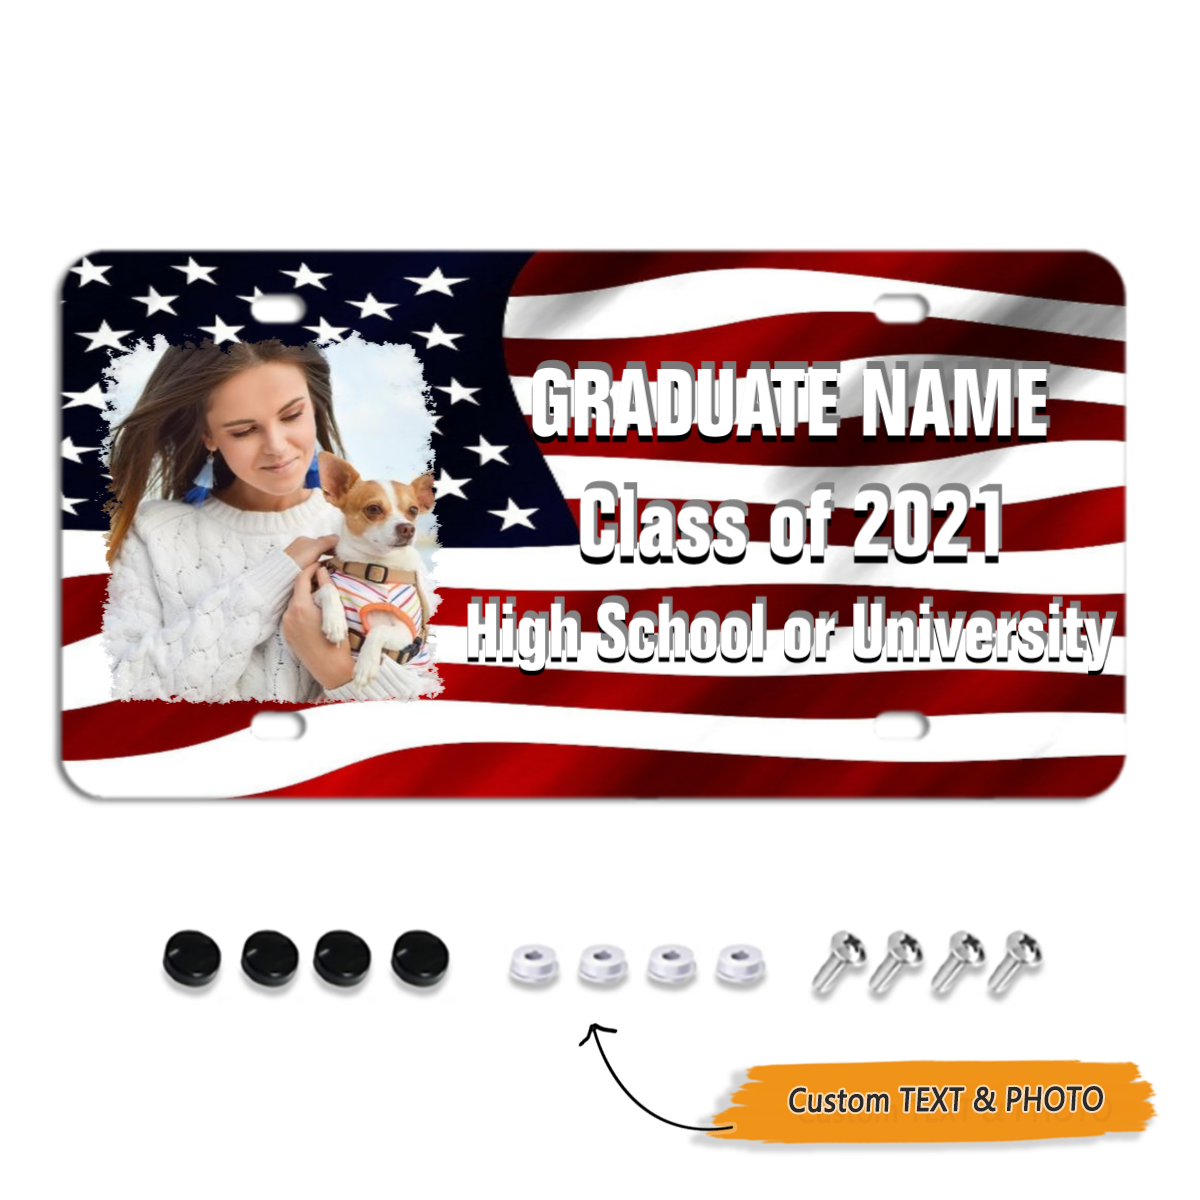 100+ Backgrounds & PERSONALIZED TEXT Graduation License Plate